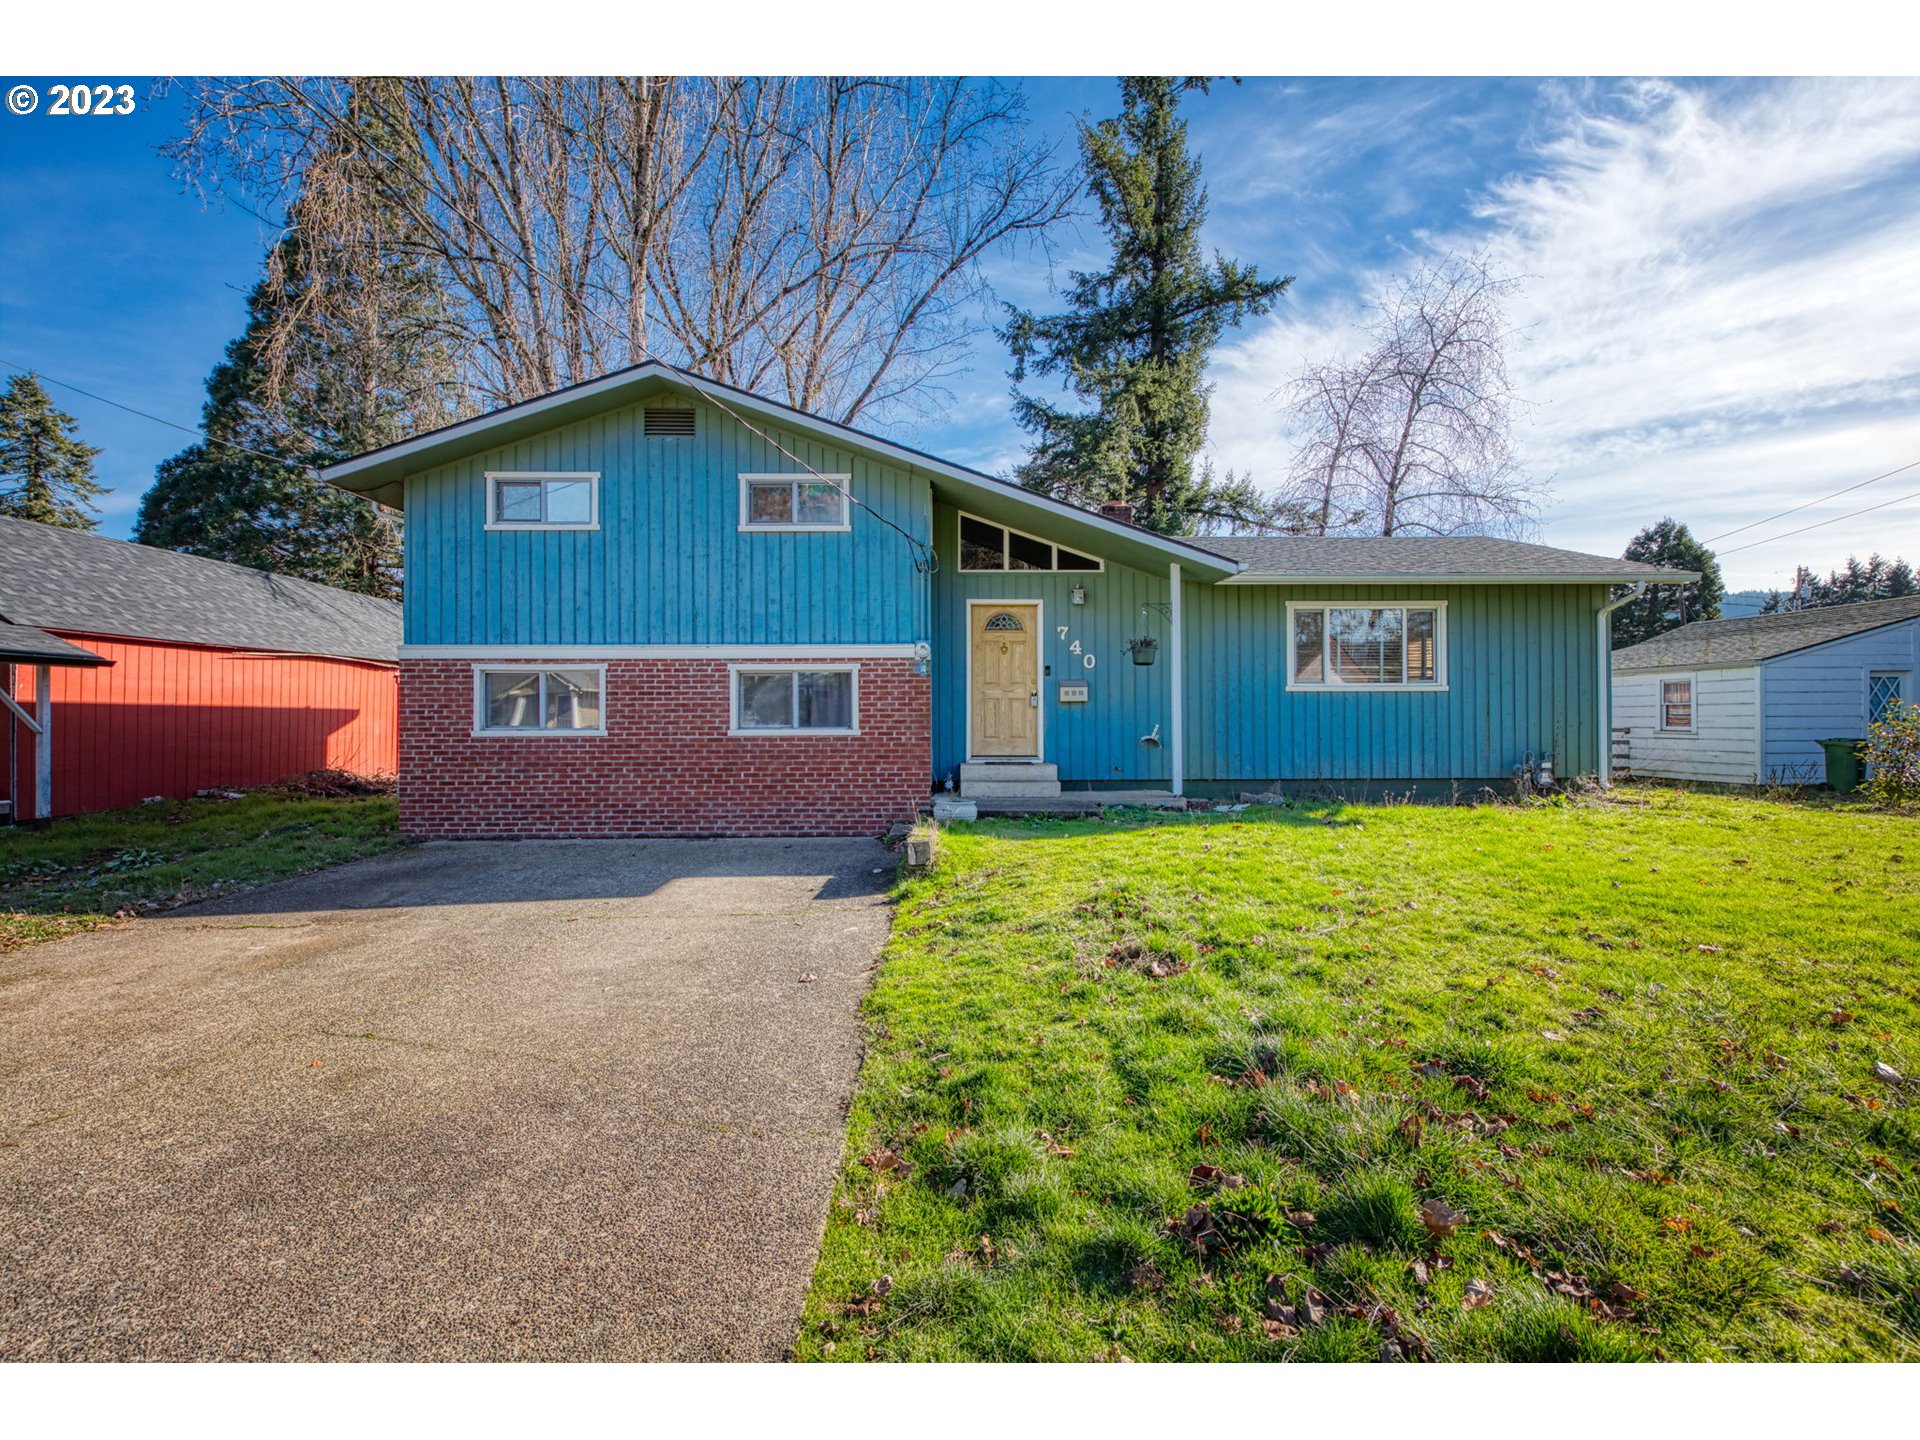 740 S 3RD ST, Cottage Grove, OR 97424